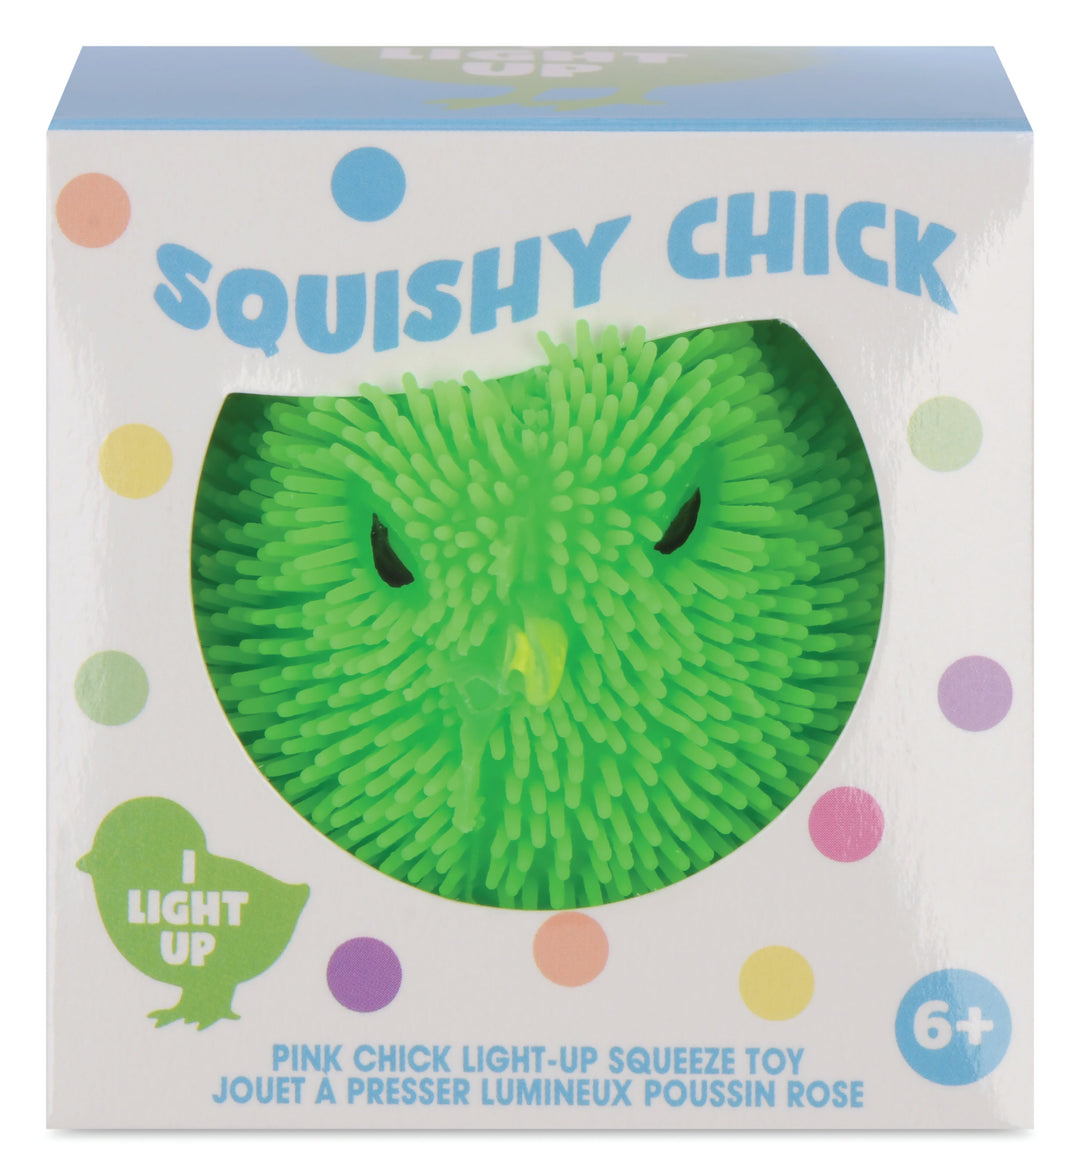 GREEN CHICK LIGHT UP SQUEEZE TOY Iscream Easter Gifts & Basket Fillers Bonjour Fete - Party Supplies